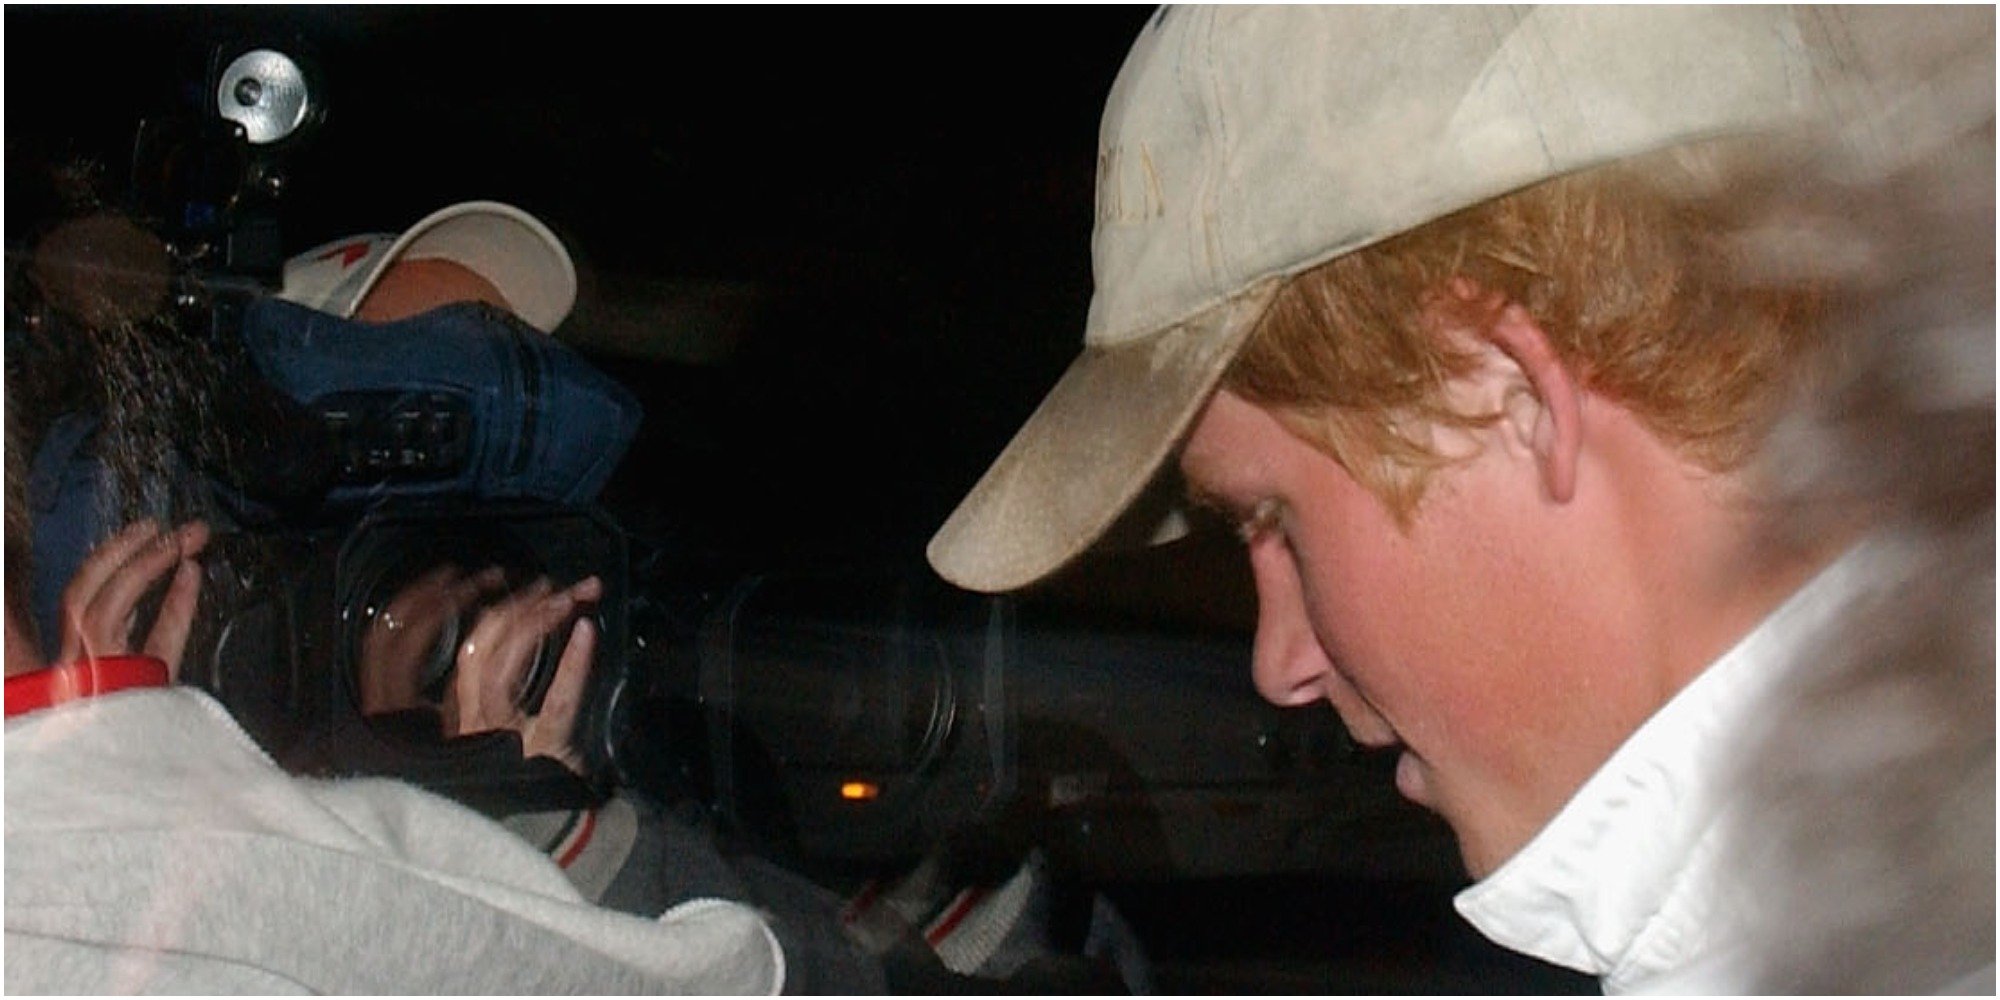 Prince Harry is photographed by the paparazzi in 2003.